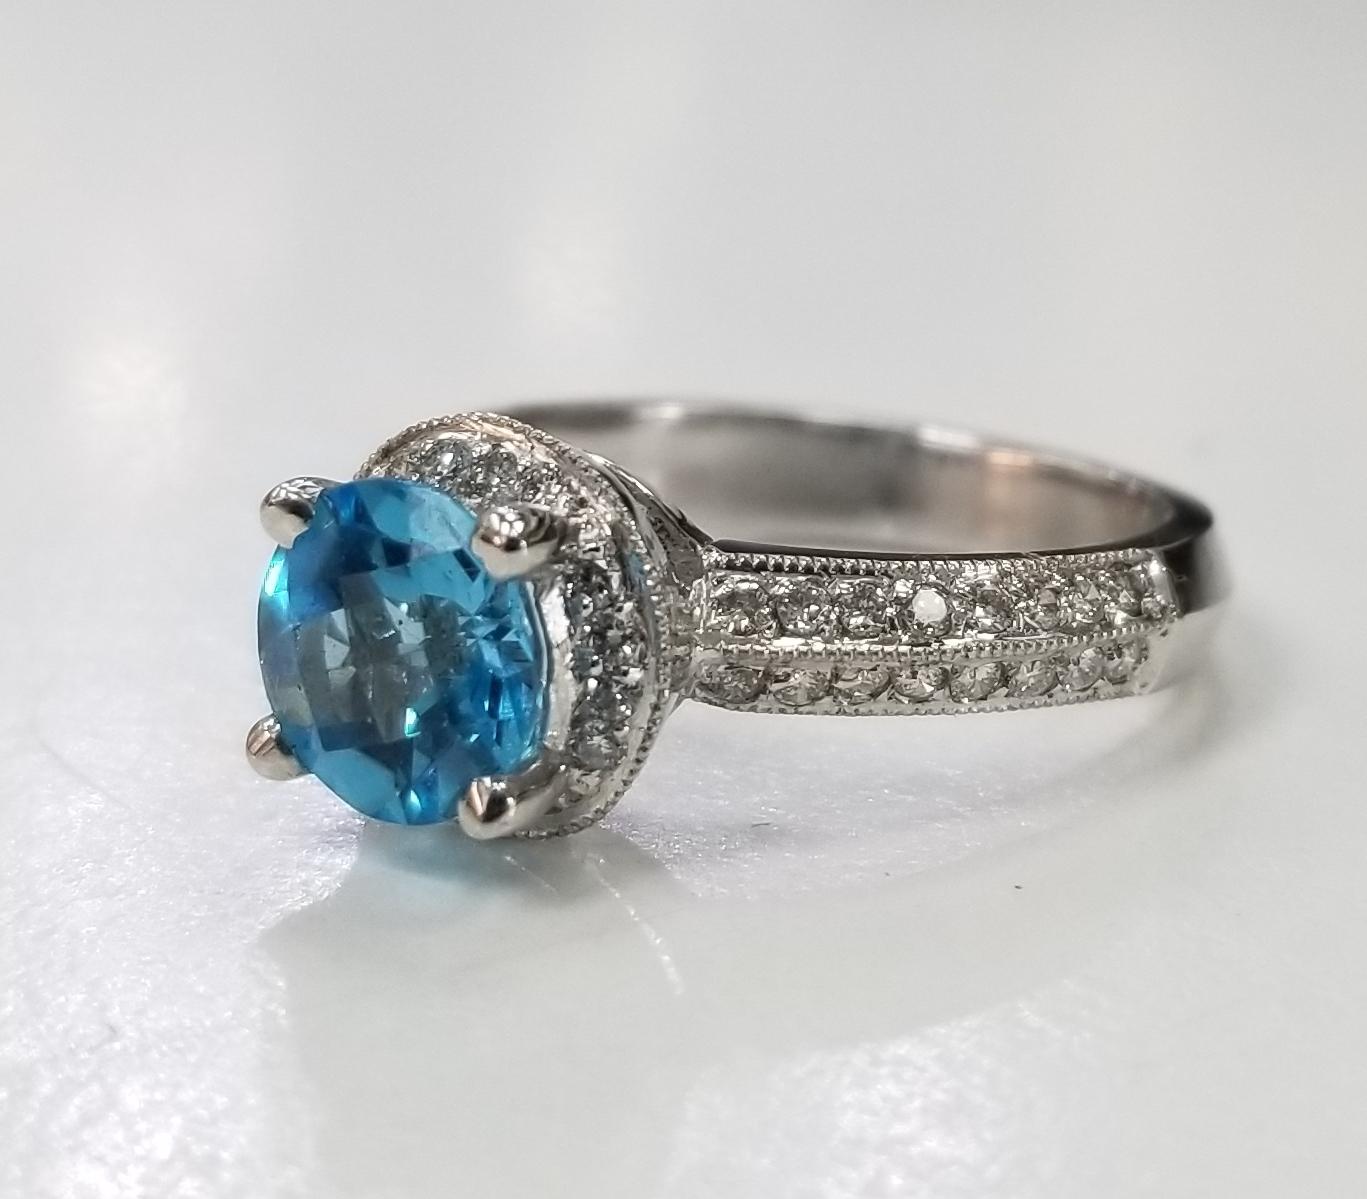 14k white gold blue topaz and diamond ring paved on knife edge, containing 1 round blue topaz of gem quality weihging .50pts. and 44 round full cut diamonds of very fine quality weighing .51pts. set on a knife edge. ring size is 5.75